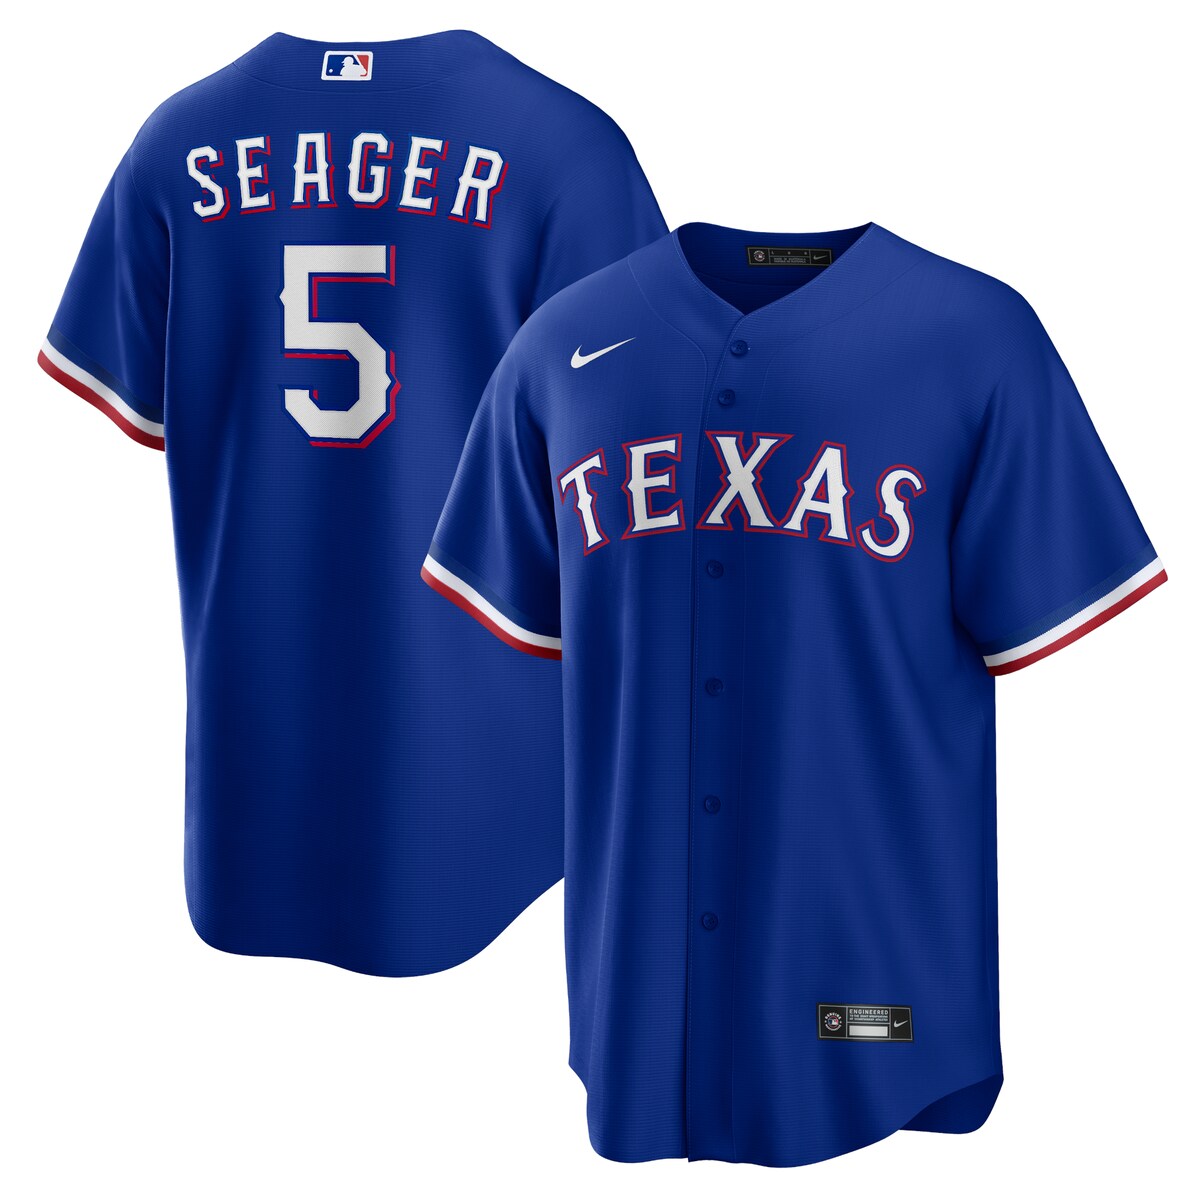 Whether you're watching from the couch or within the stadium, you'll be the biggest Texas Rangers fan around when you sport this Corey Seager Alternate Replica Player Jersey! This Nike jersey features bold Texas Rangers graphics that will showcase your team pride no matter where you watch the game. This jersey would make a great addition to any Texas Rangers fan's closet.Rounded hemBrand: NikeImportedOfficially licensedHeat-sealed jock tagMLB Batterman applique on center back neckMaterial: 100% PolyesterFull-button frontHeat-sealed transfer applique